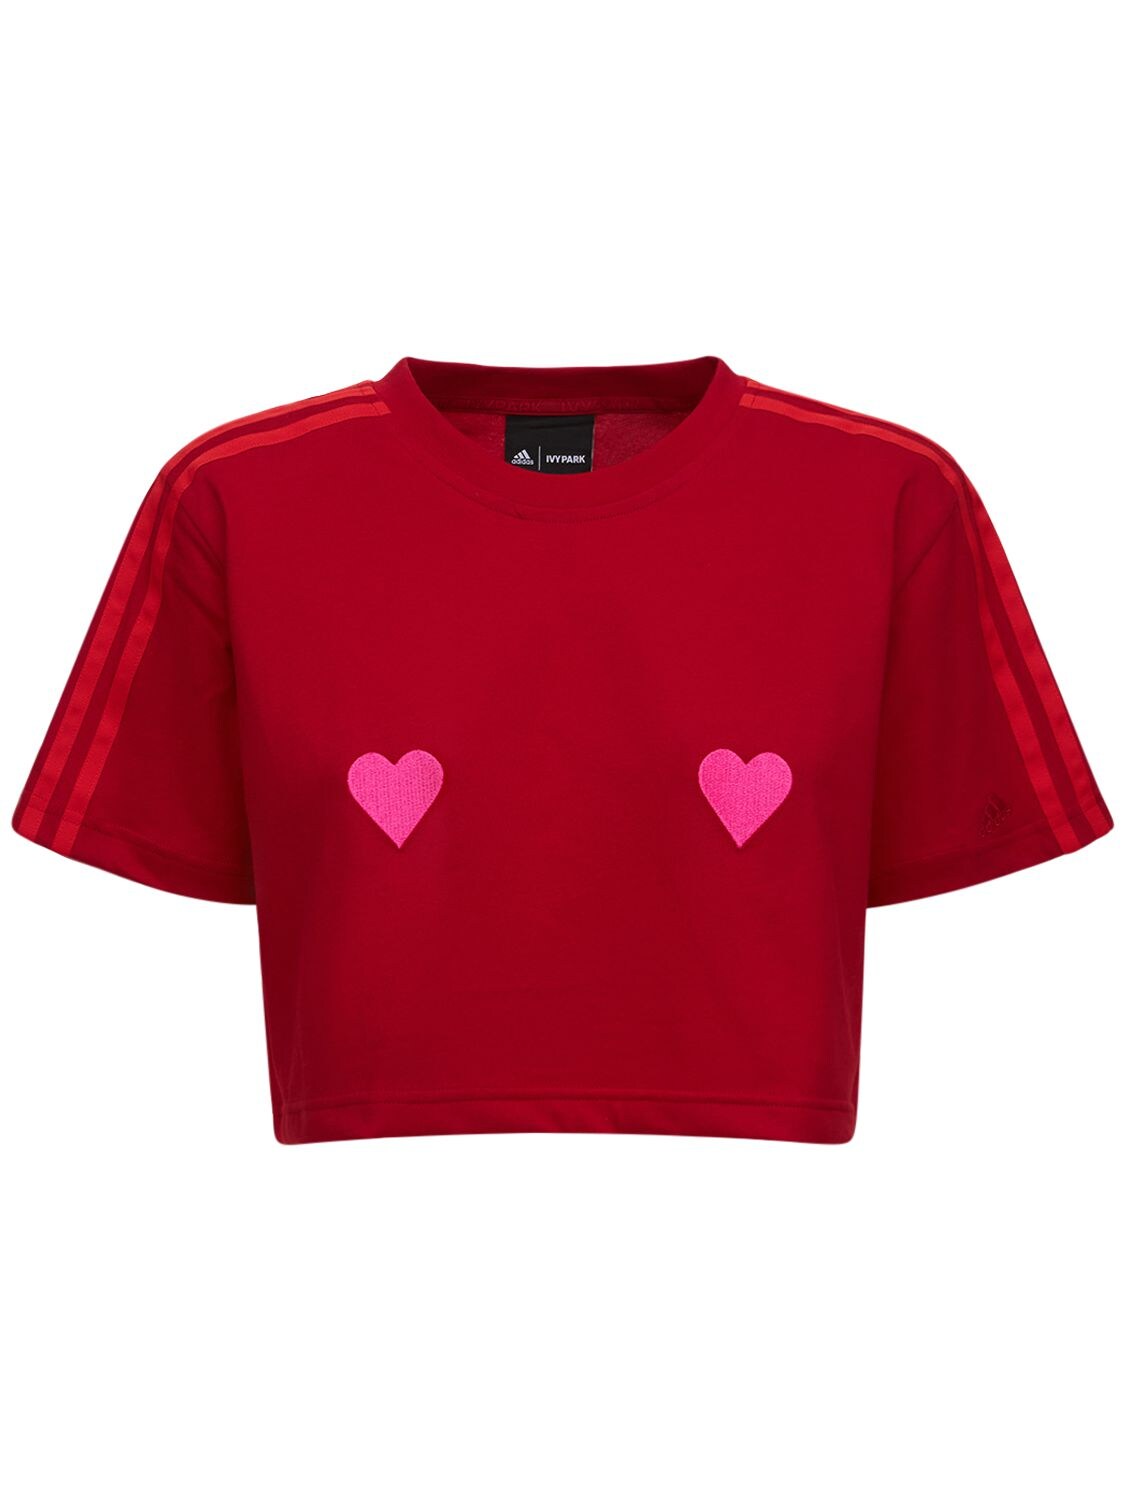 Adidas X Ivy Park Ivy Park Cropped Cotton T Shirt In Red Modesens